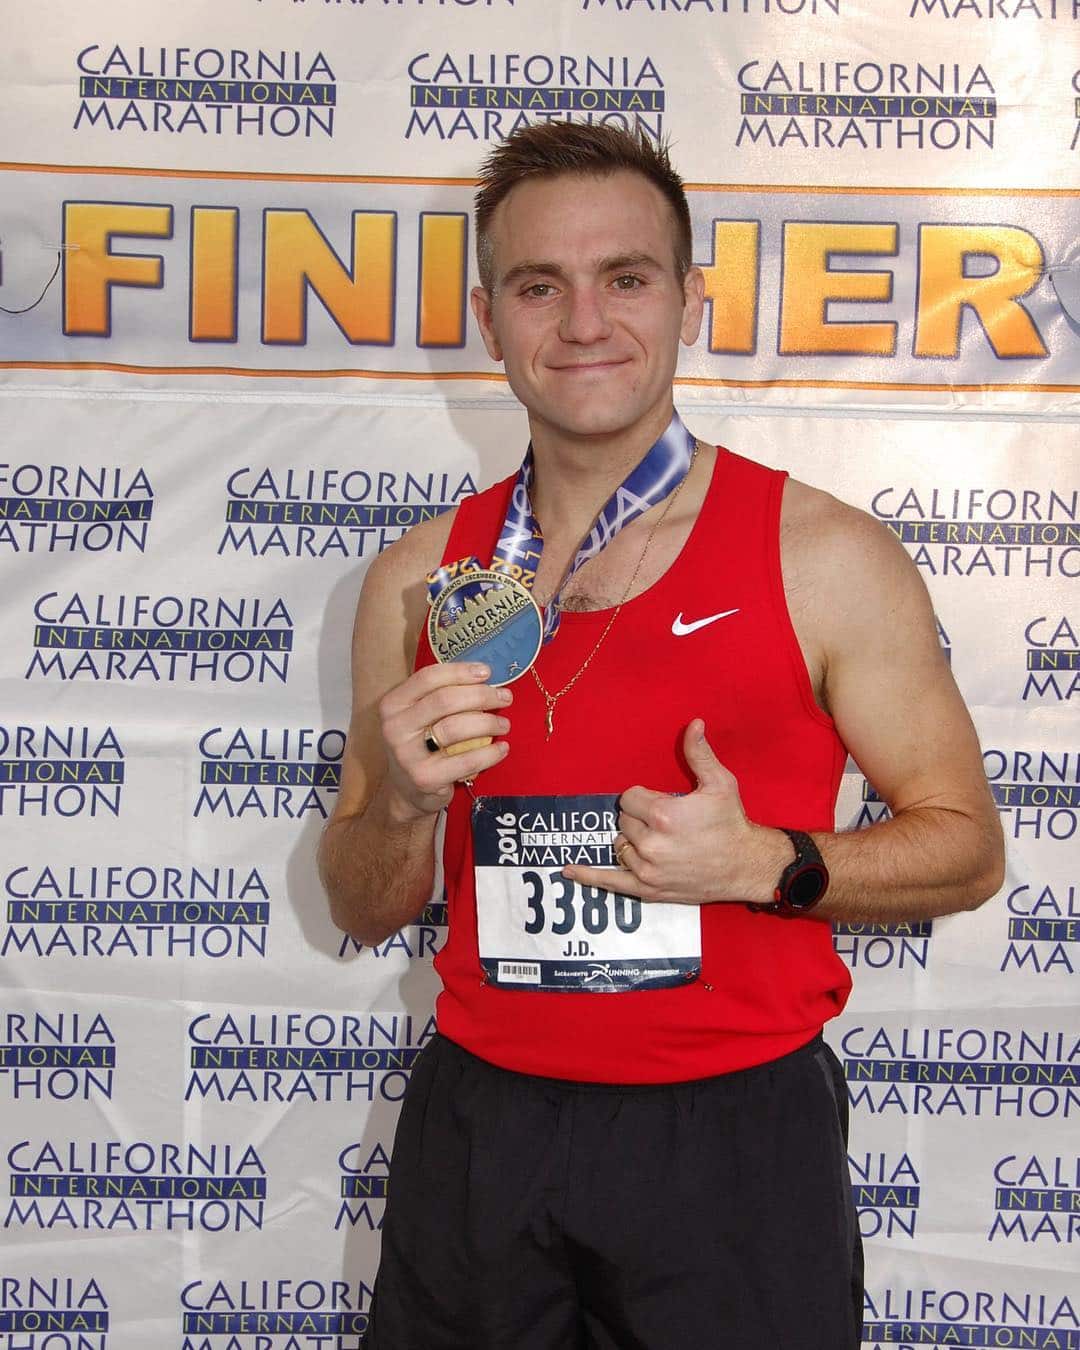 Meet SRA AmbasSRAdor @jd4mica. J.D. tells us what he loves about running in Sacramento: “The thing I love most about running in Sacramento is the variety. I live in Wilton, CA (Sacramento County), which is a small rural town near Elk Grove. It’s beautiful country running with great landscape views and a calm feel. When I run there, it really allows me to be more mindful and focus on the present without any distractions. 
When I run during the week, I’m usually running in Sacramento. As you can imagine, my views and feel are completely different, but not in a bad way. I really have grown to appreciate the differences between country and city running. It helps me appreciate Sacramento’s diversity. If I decide to head out on the American River Trail, I get a taste of nature right in the middle of Sacramento. It’s the best of both worlds